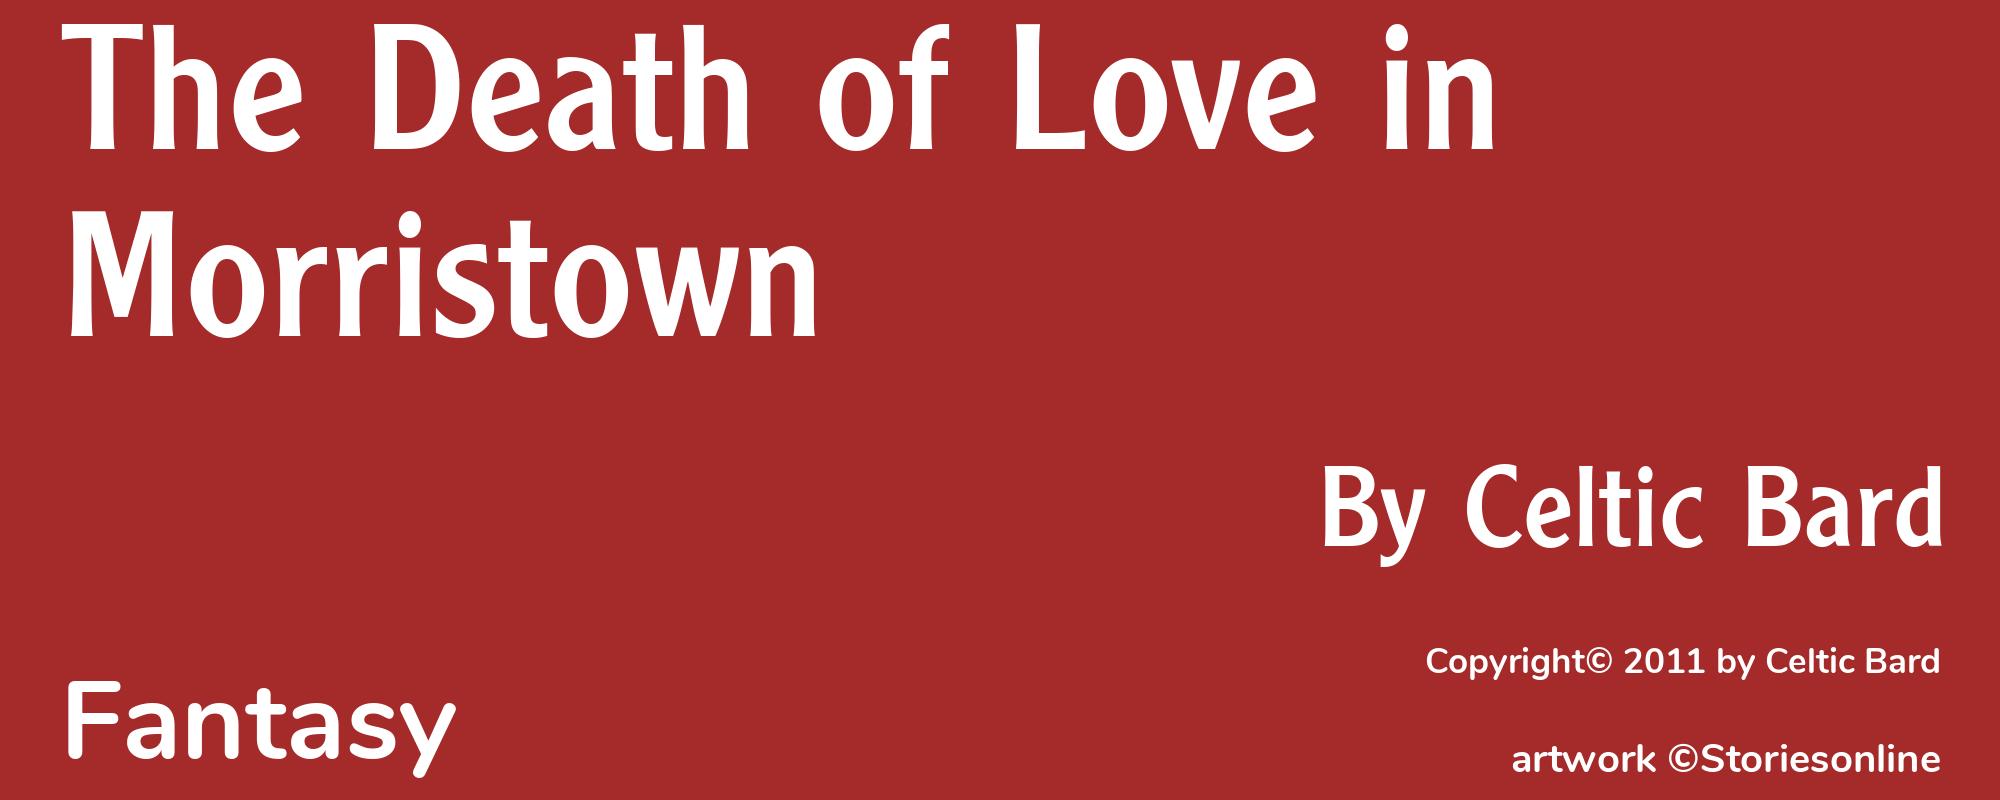 The Death of Love in Morristown - Cover